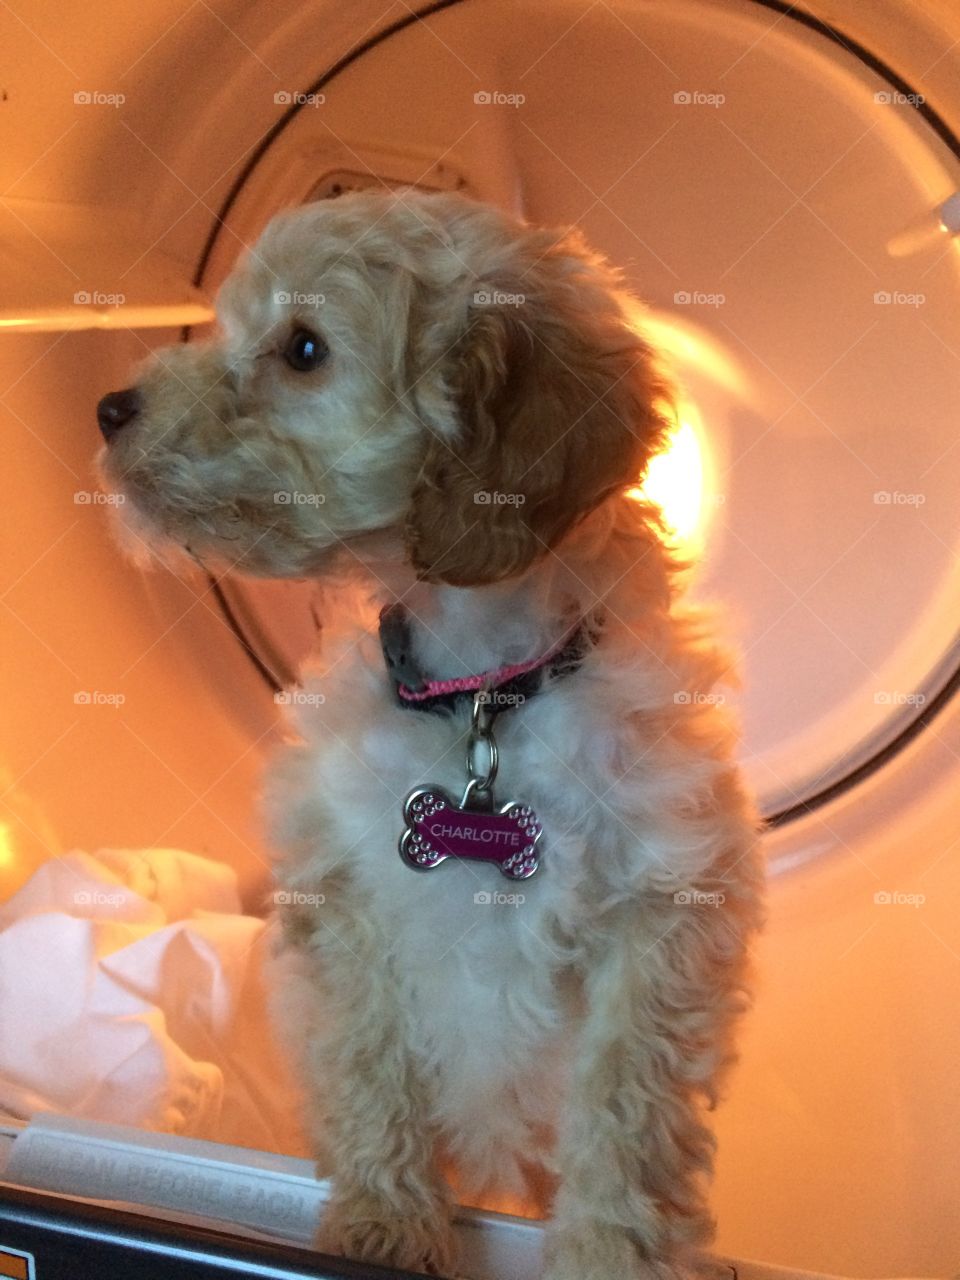 Labradoodle Puppy in Dryer